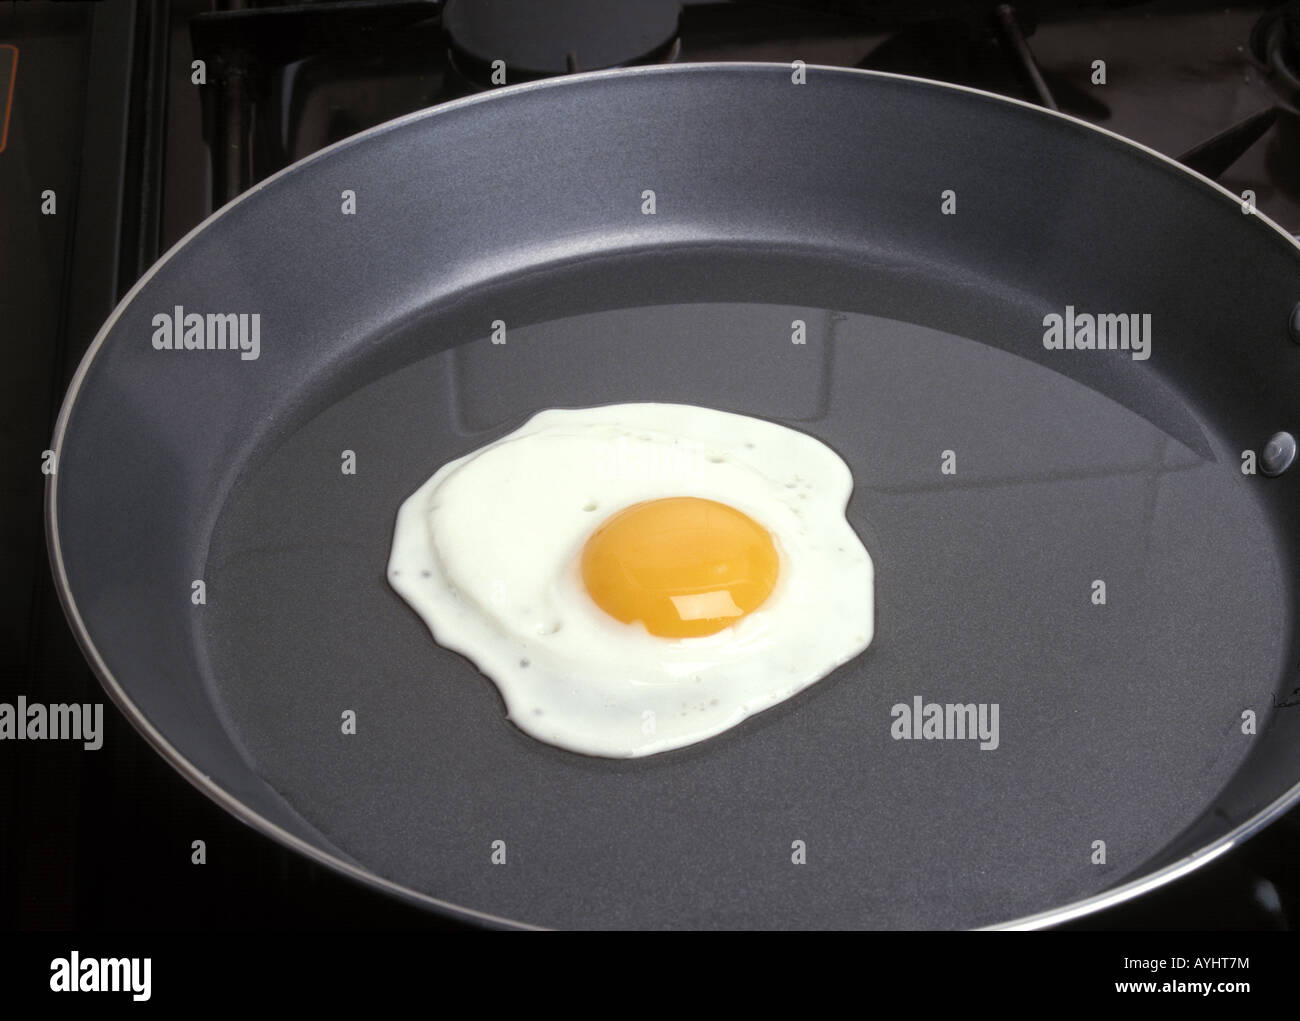 Fried egg in non stick frying pan Stock Photo